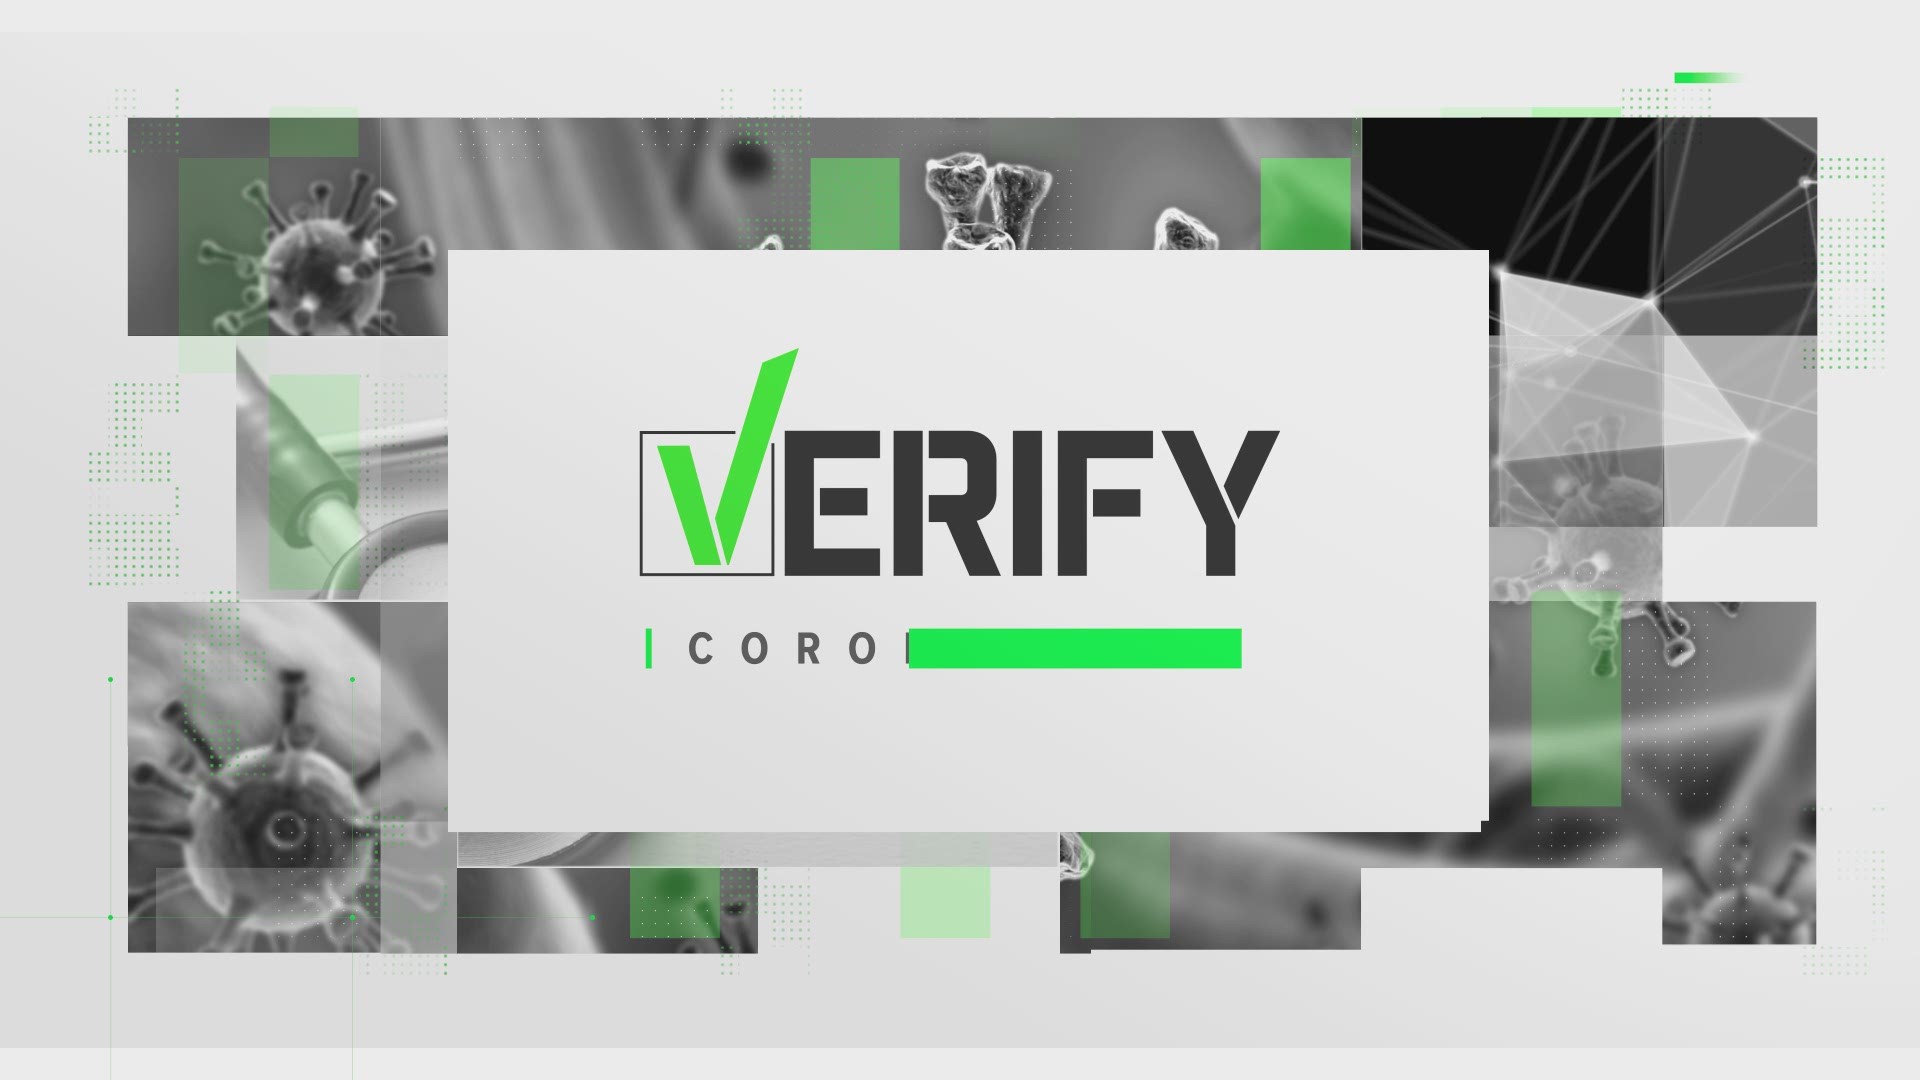 The VERIFY team spoke with a top doctor at the Centers for Disease Control and Prevention to explain the latest guidance on masks.